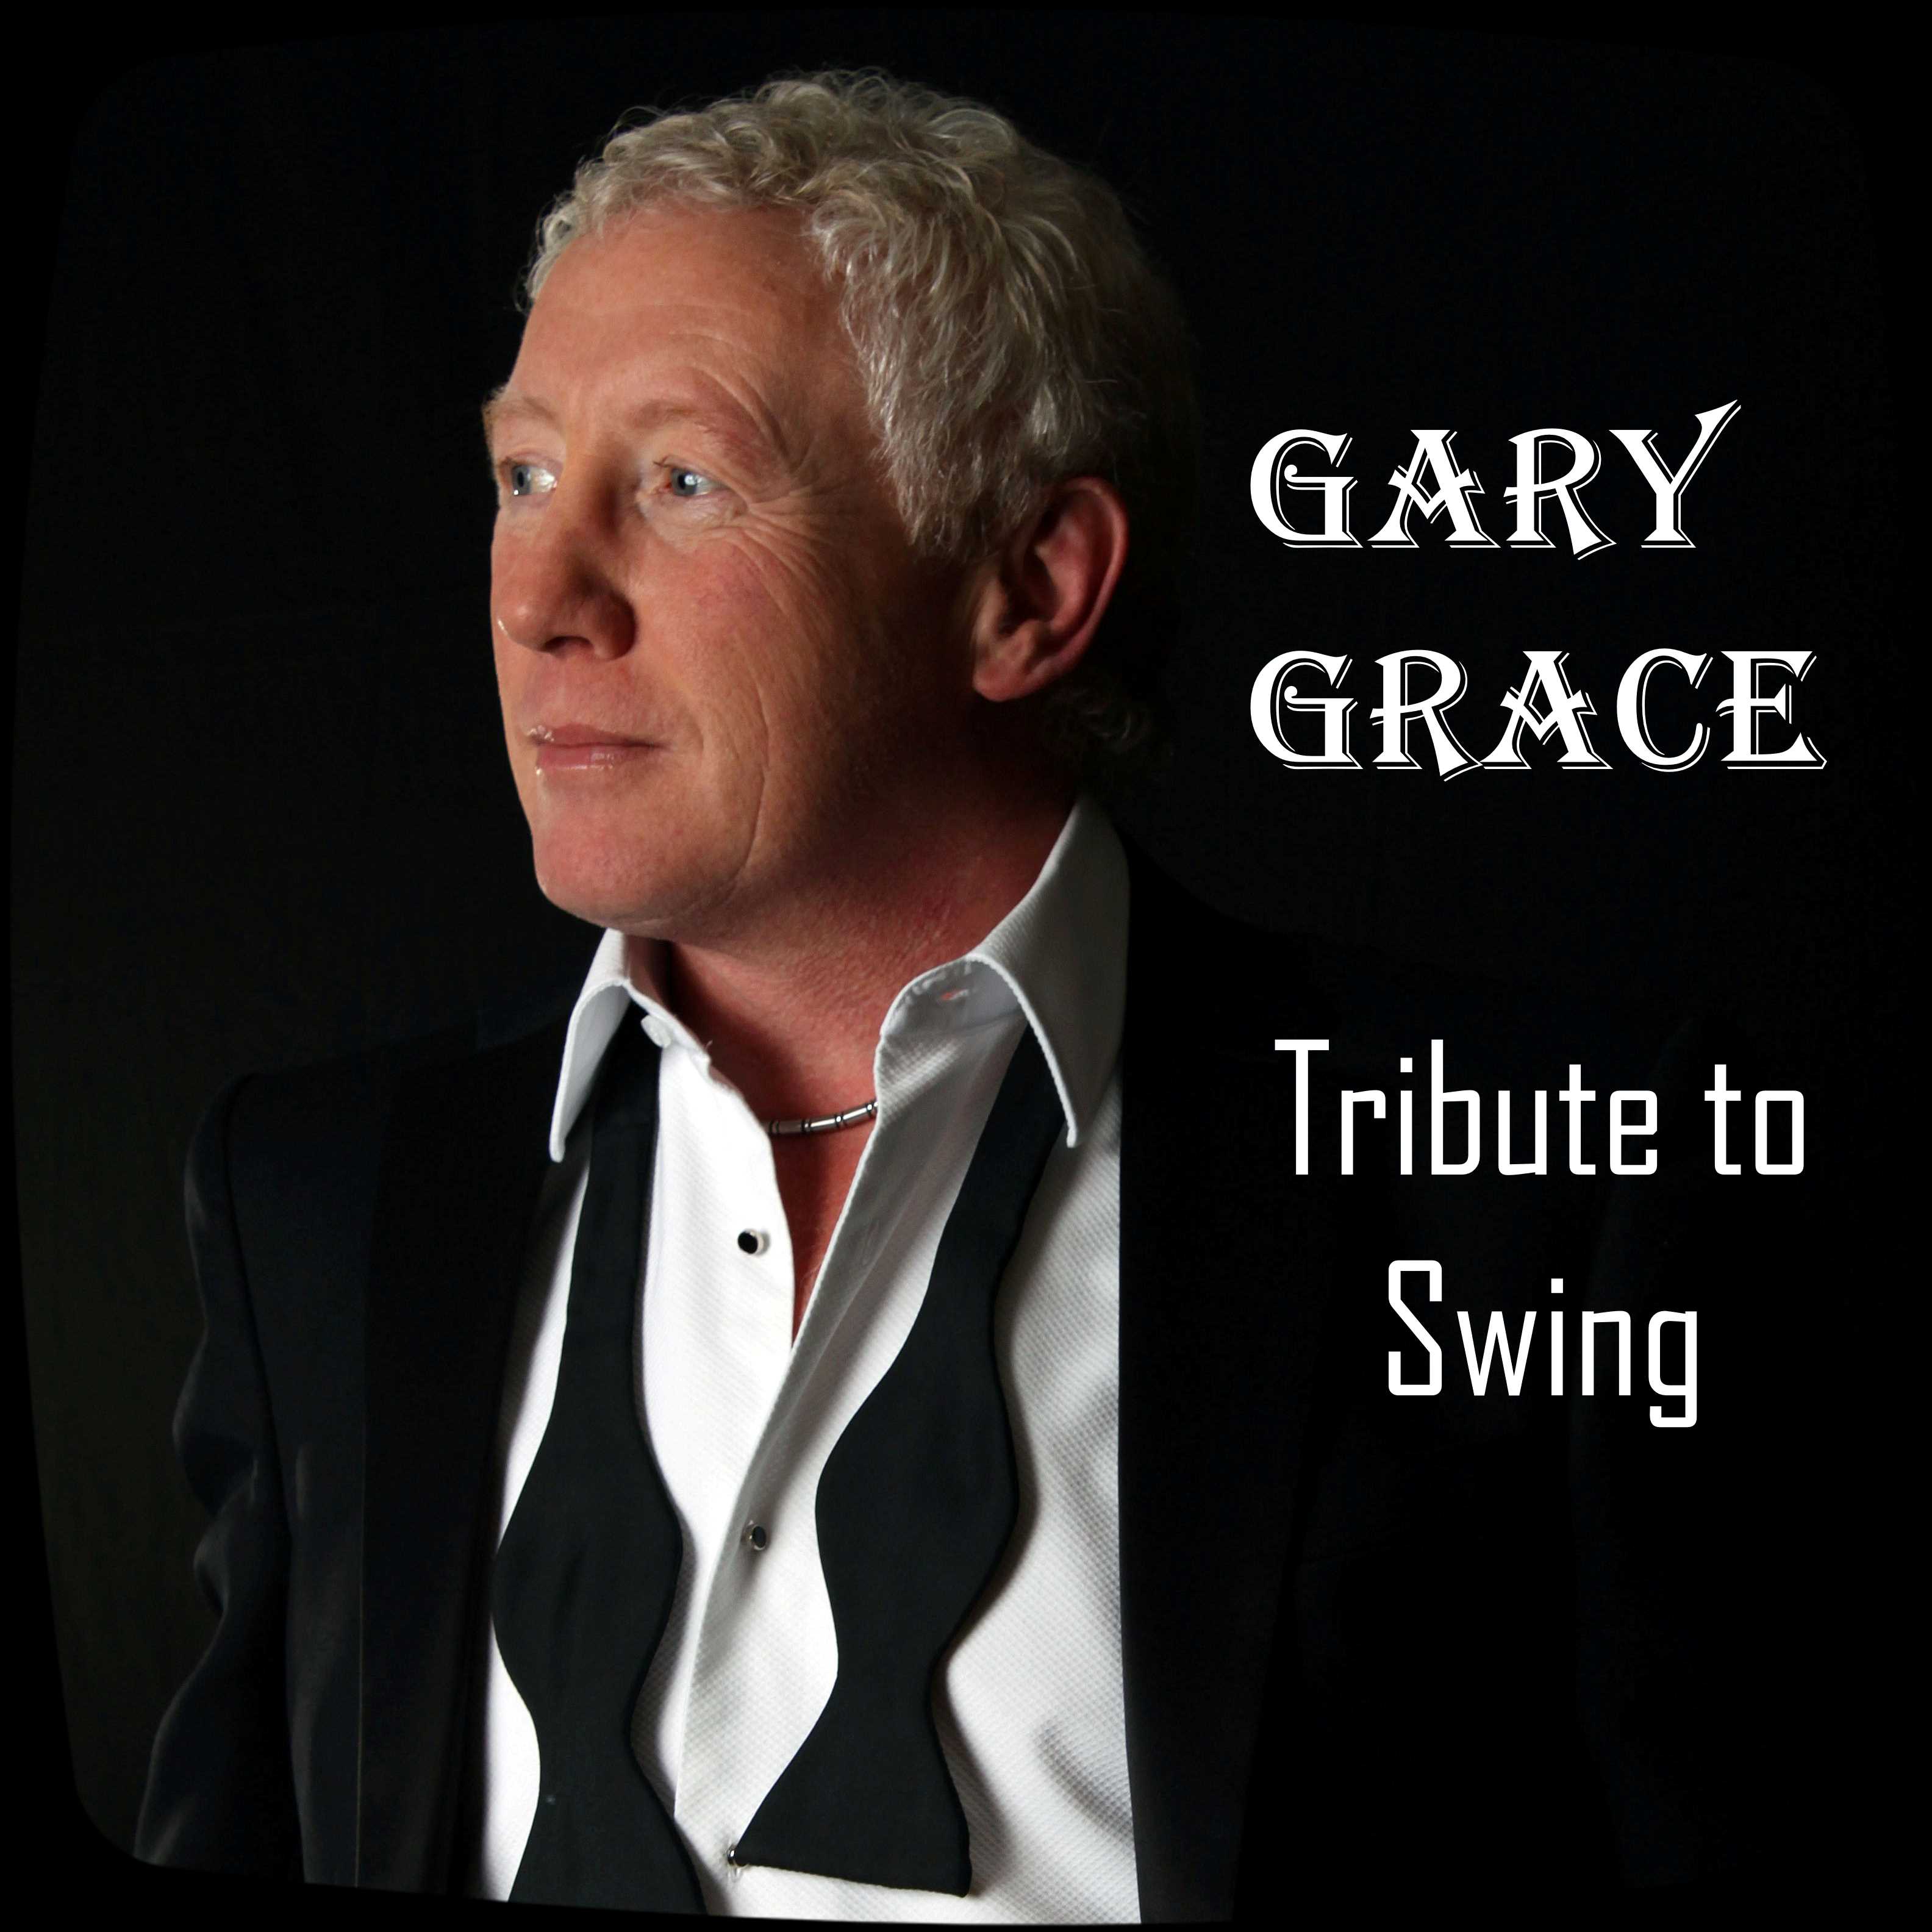 Gary Grace Tribute to Swing South Yorkshire